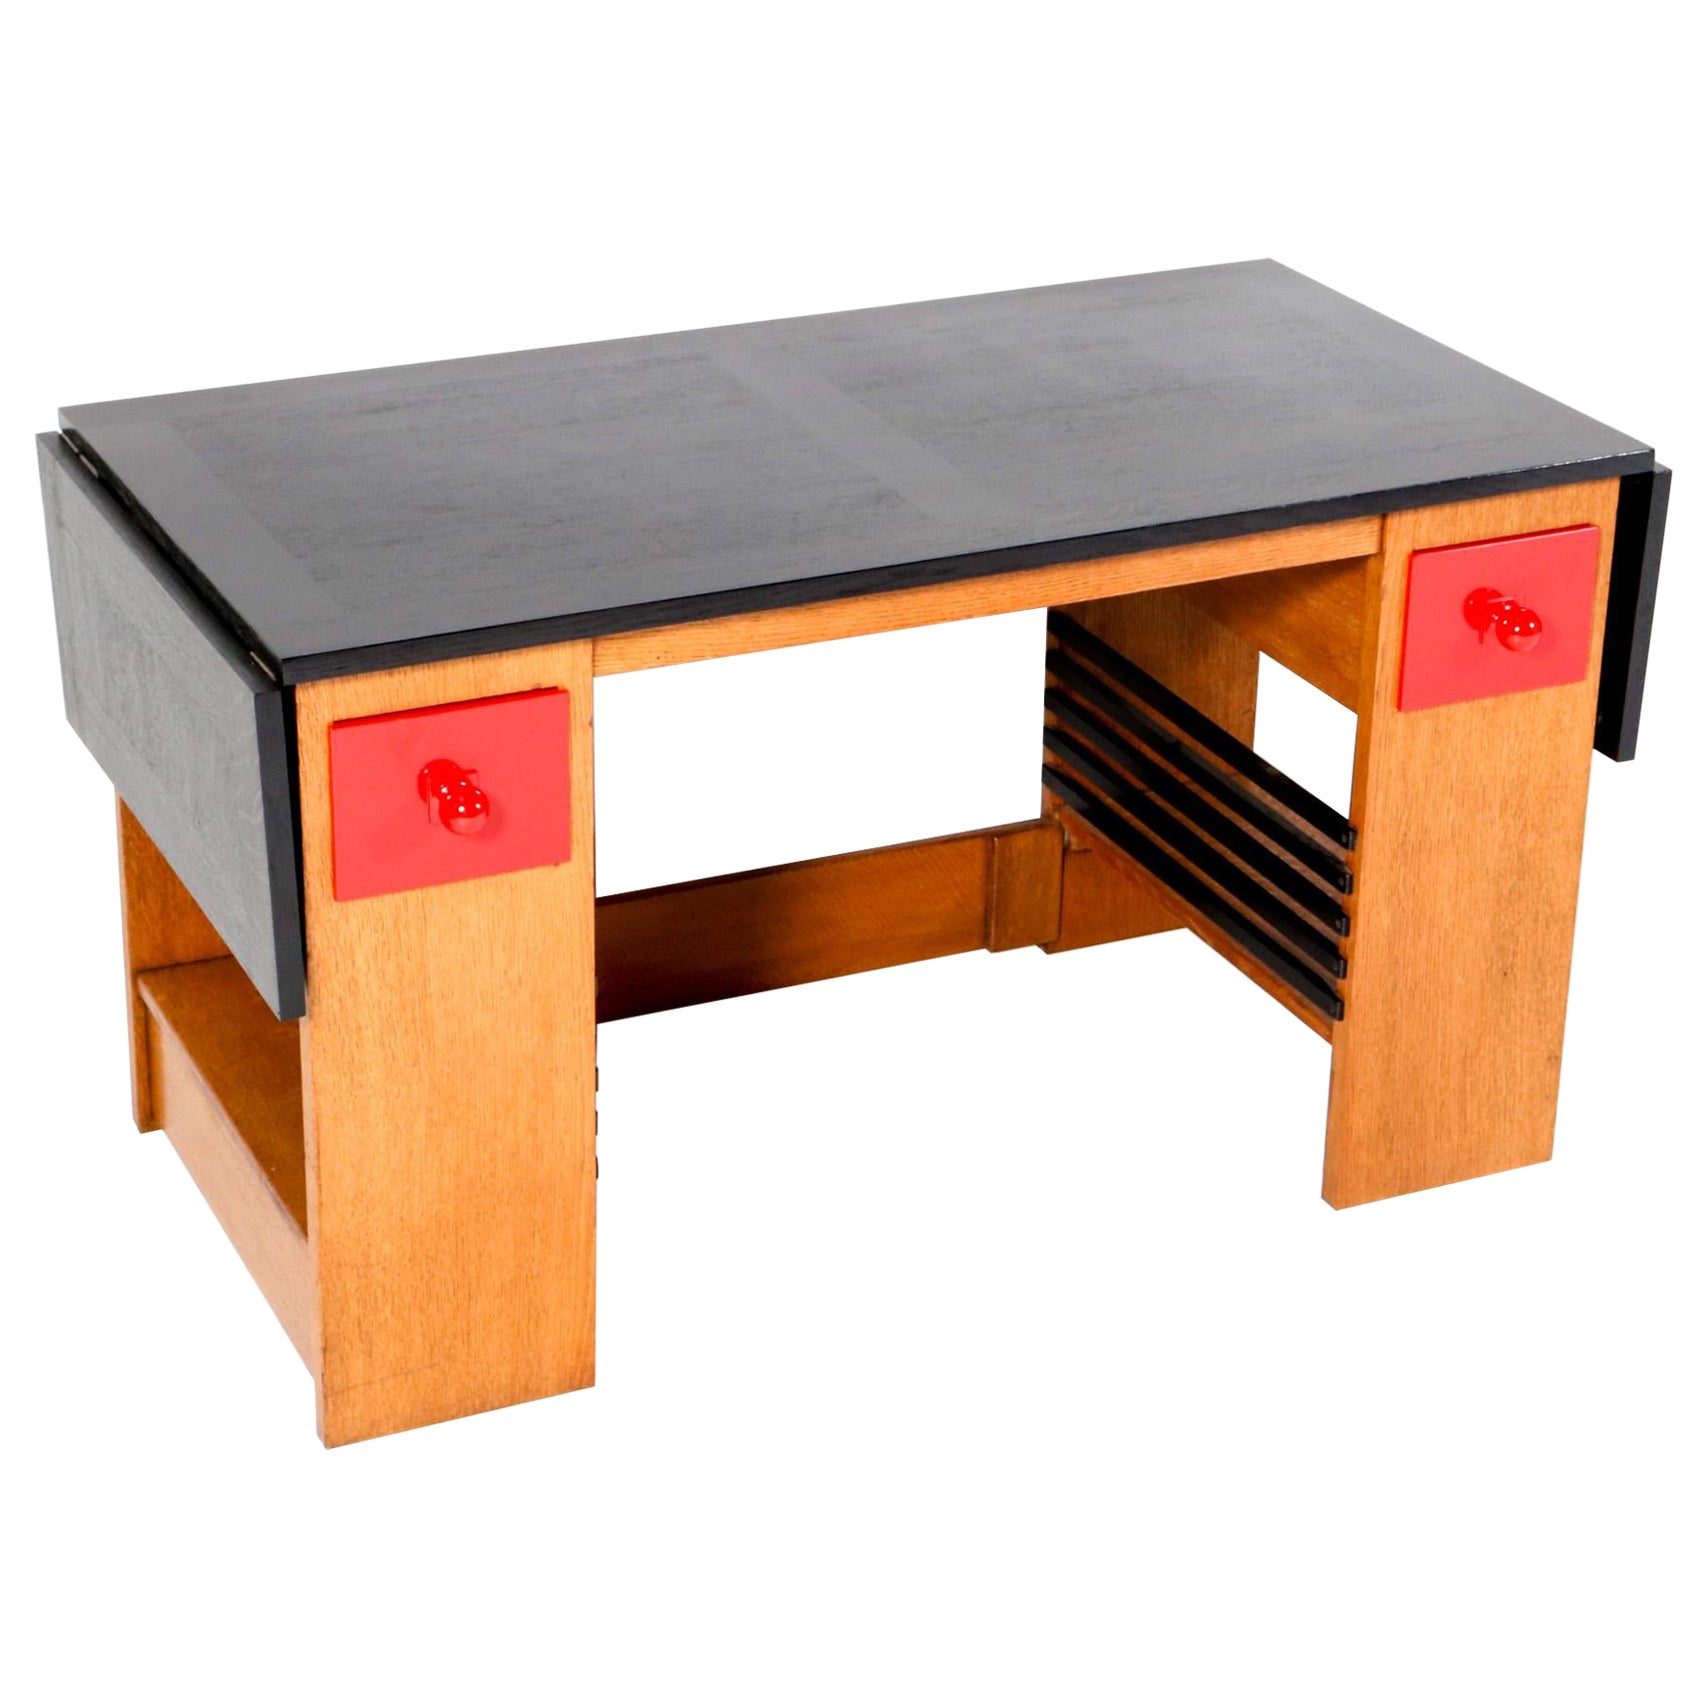  Art Deco Modernist Desk or Writing Table by Hendrik Wouda for Pander, 1920s For Sale